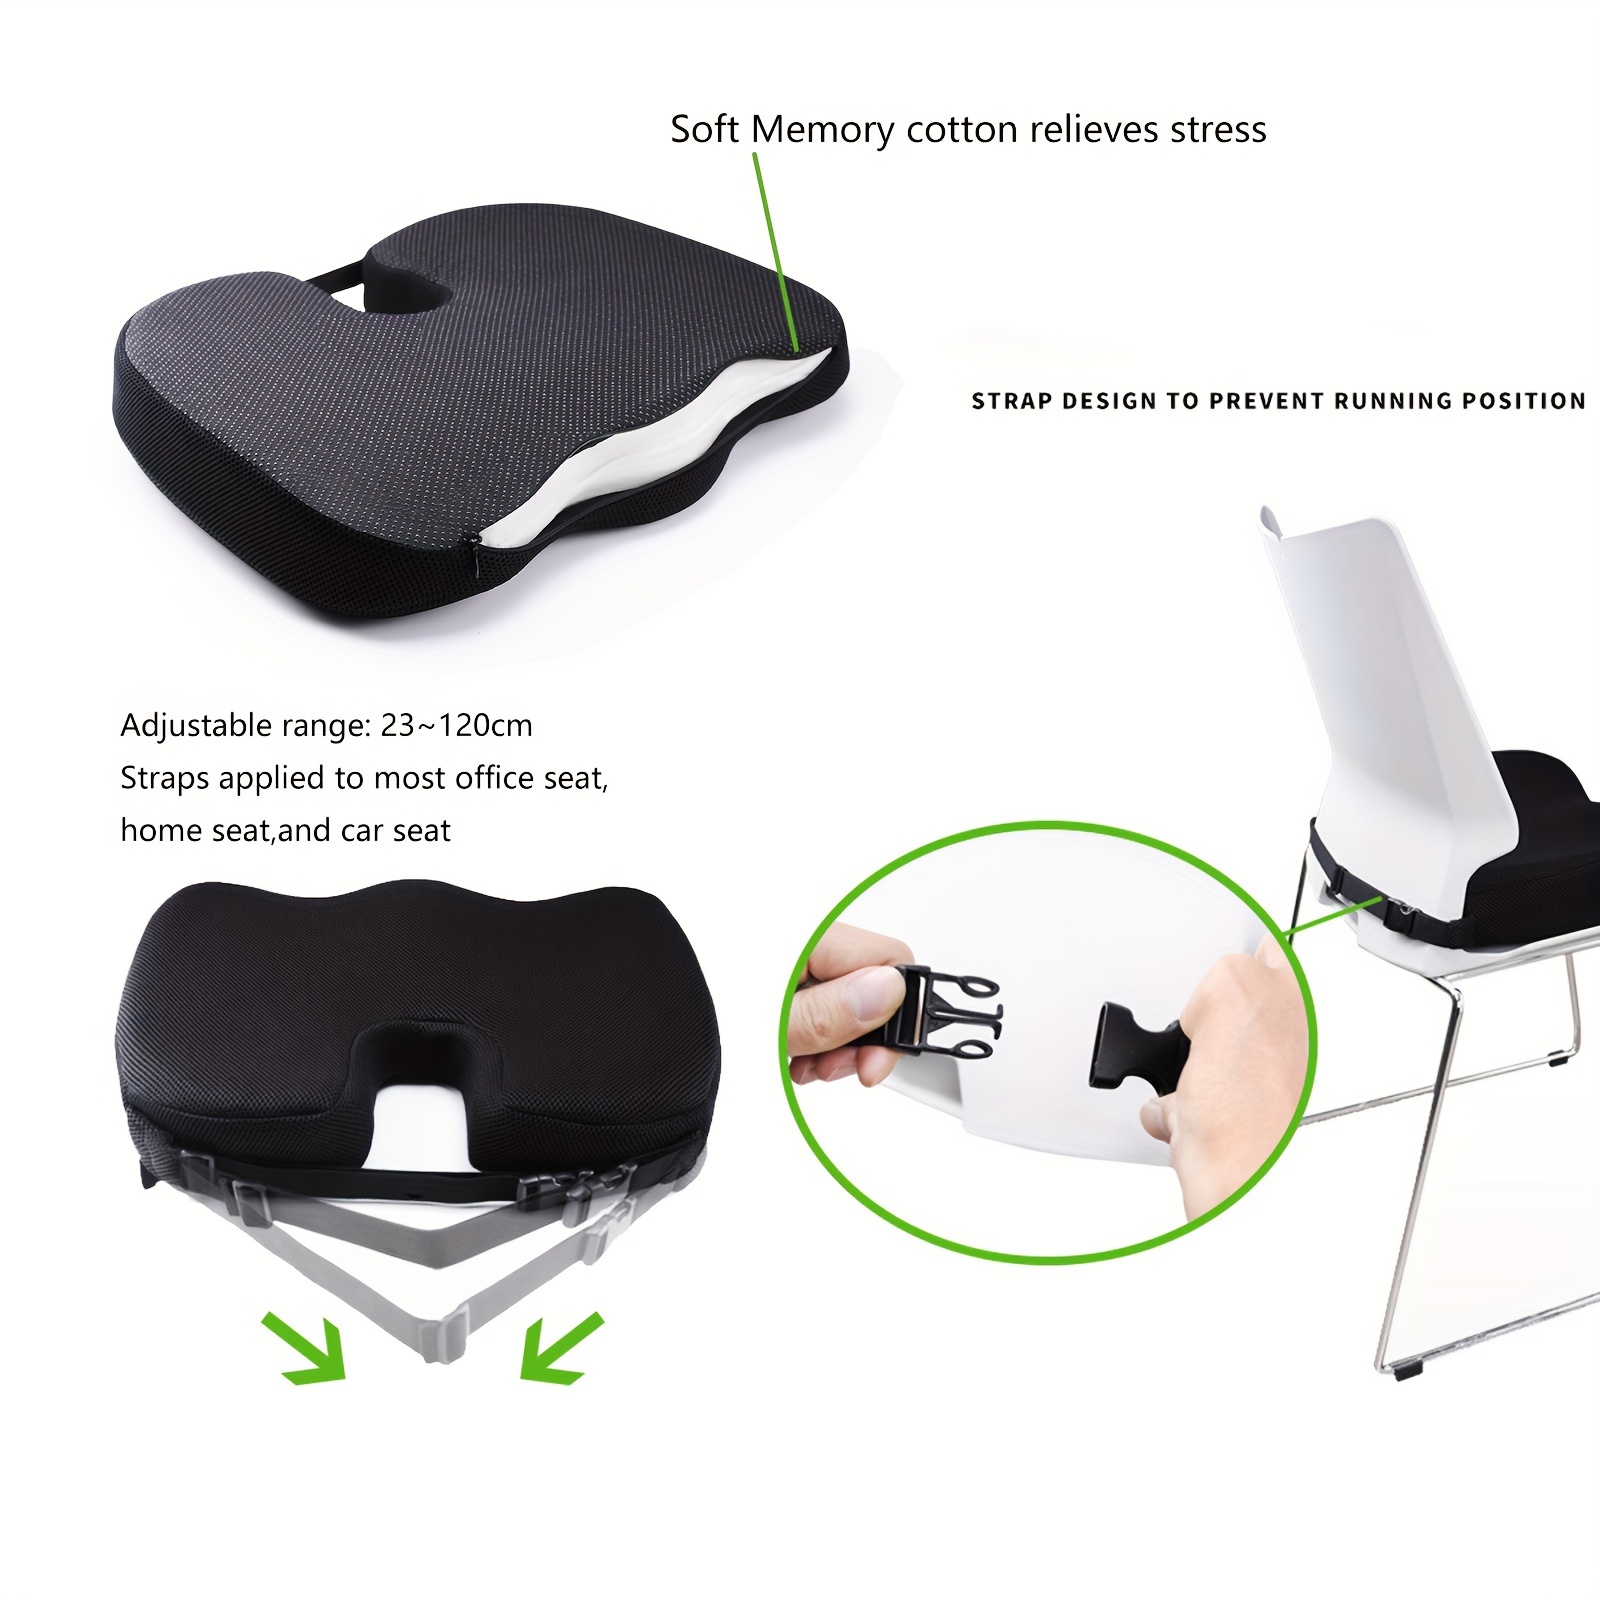 Memory Foam Seat Cushion - Helps with Sciatica Back Pain - Perfect for Your Office Chair and Sitting on The Floor Gives Relief from Tailbone Pain